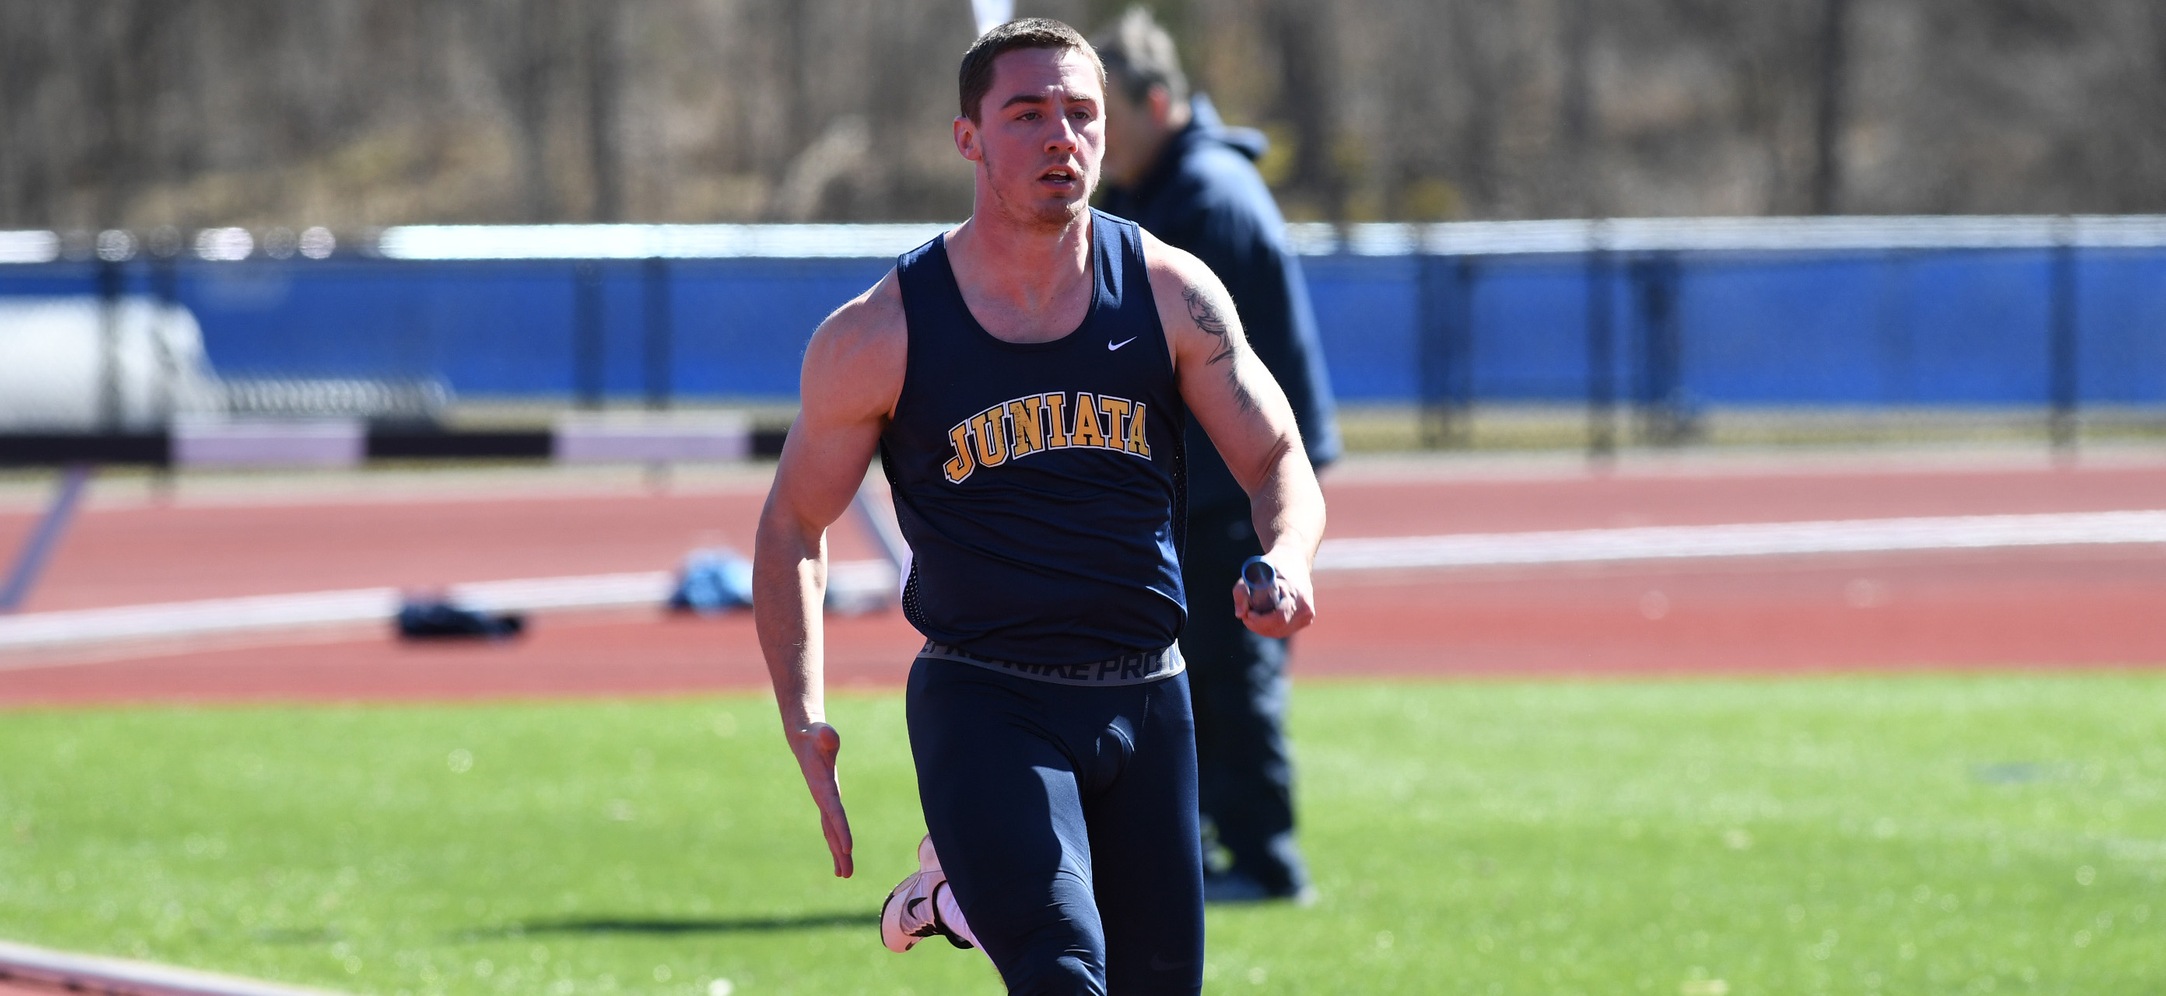 Eagles Compete at Widener Invitational